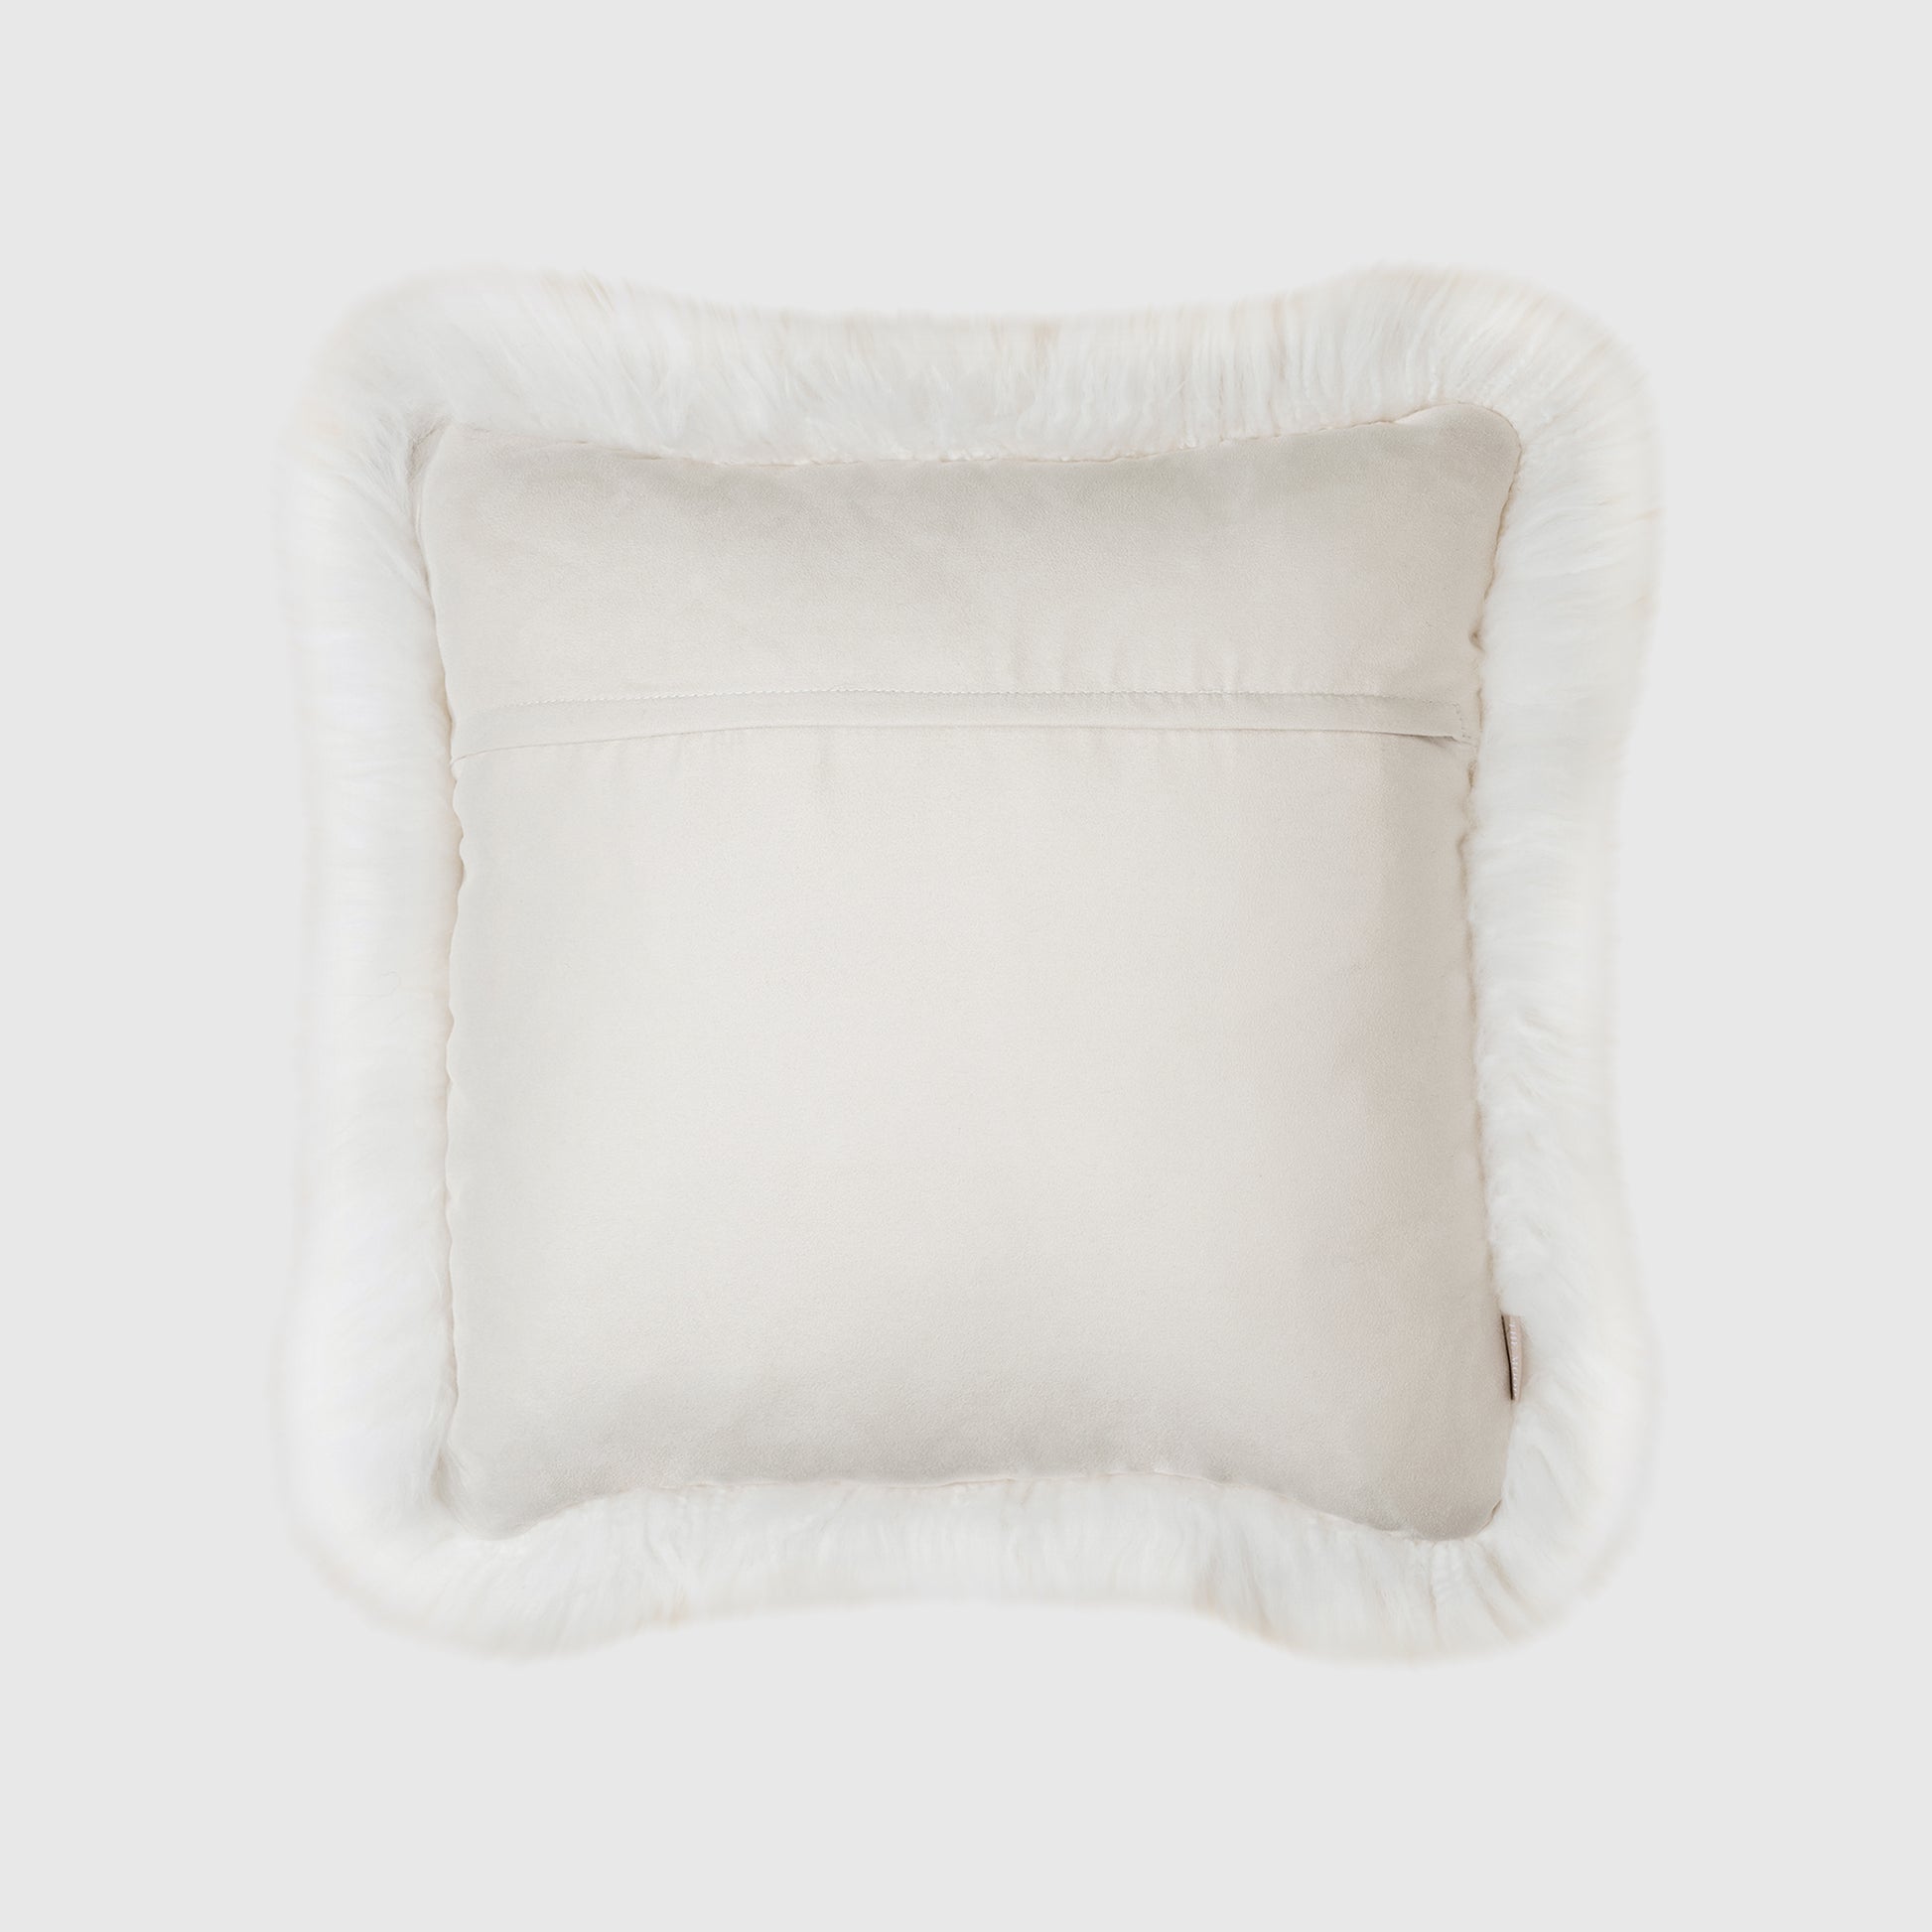 The Mood |  Charlie Sheepskin 20"x20" Pillow, Natural Ivory